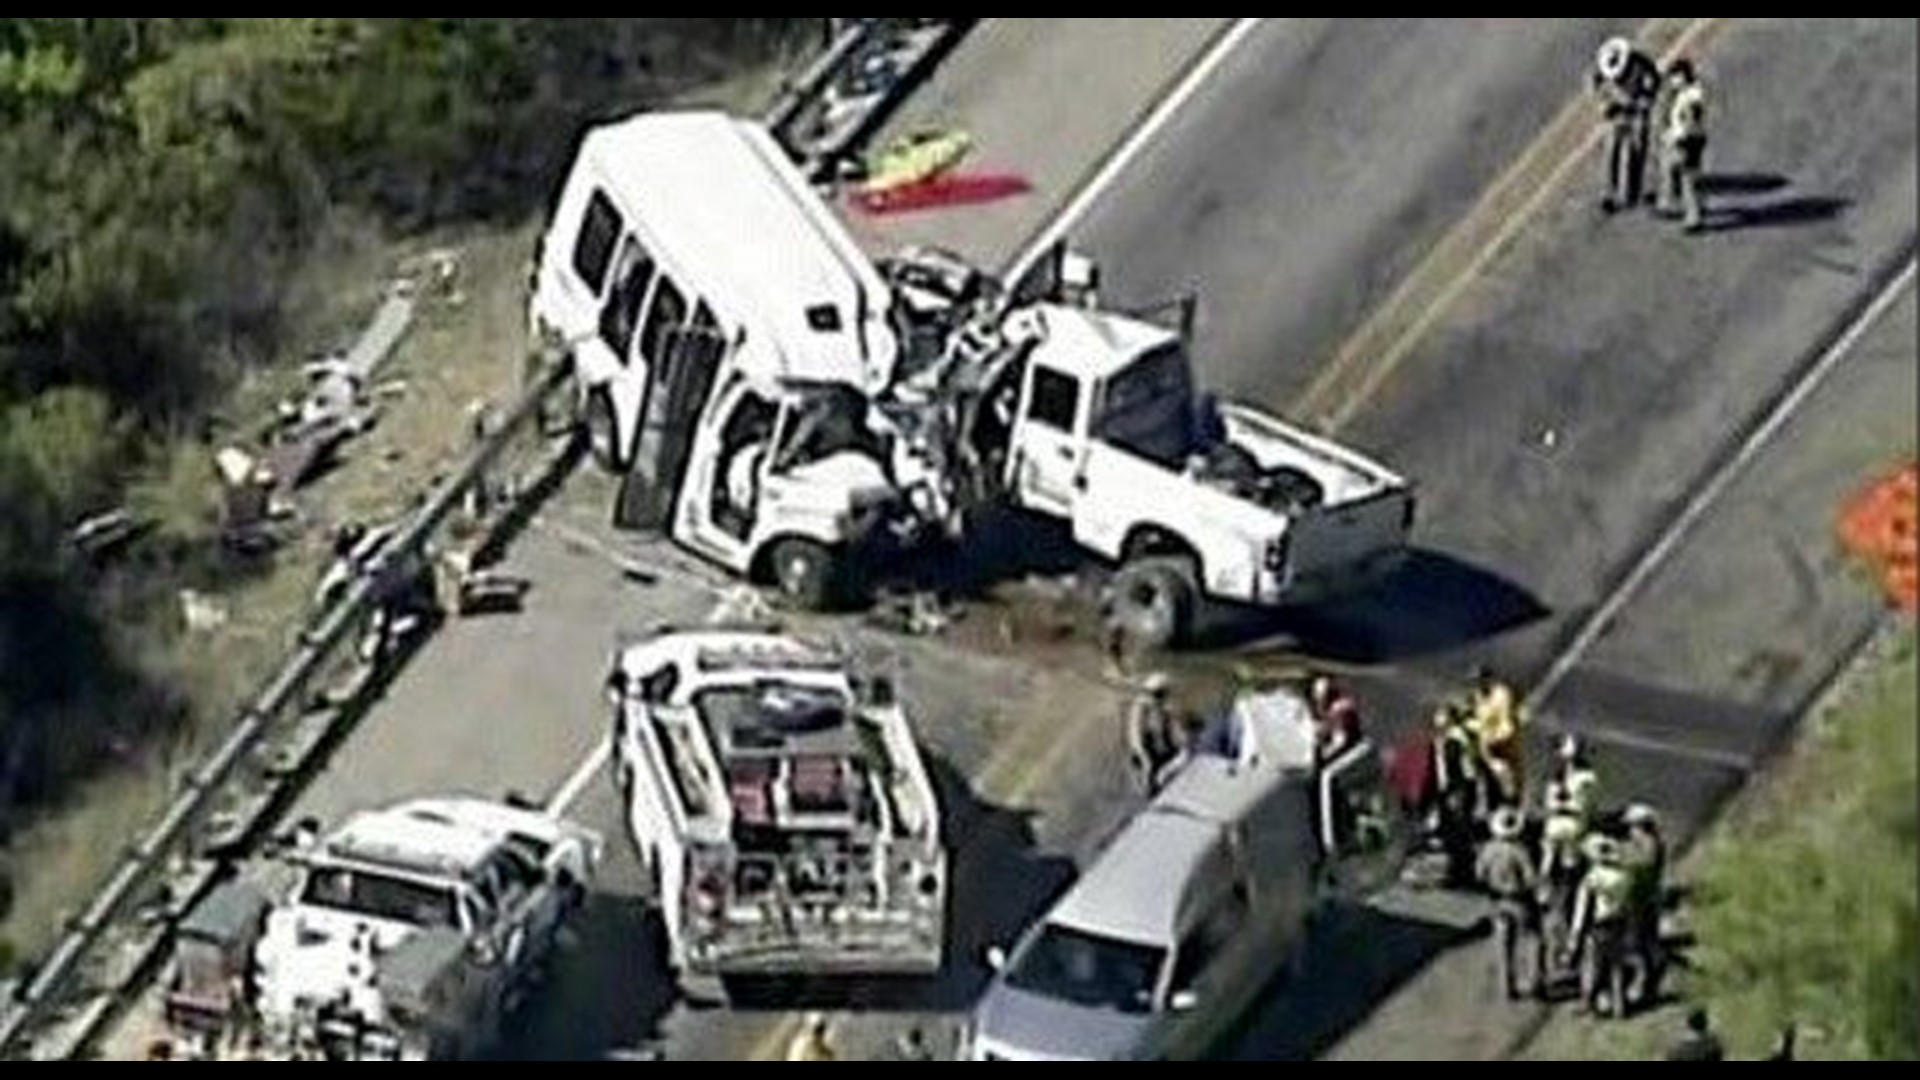 Crews To Investigate Head On Crash That Killed 13 In Texas